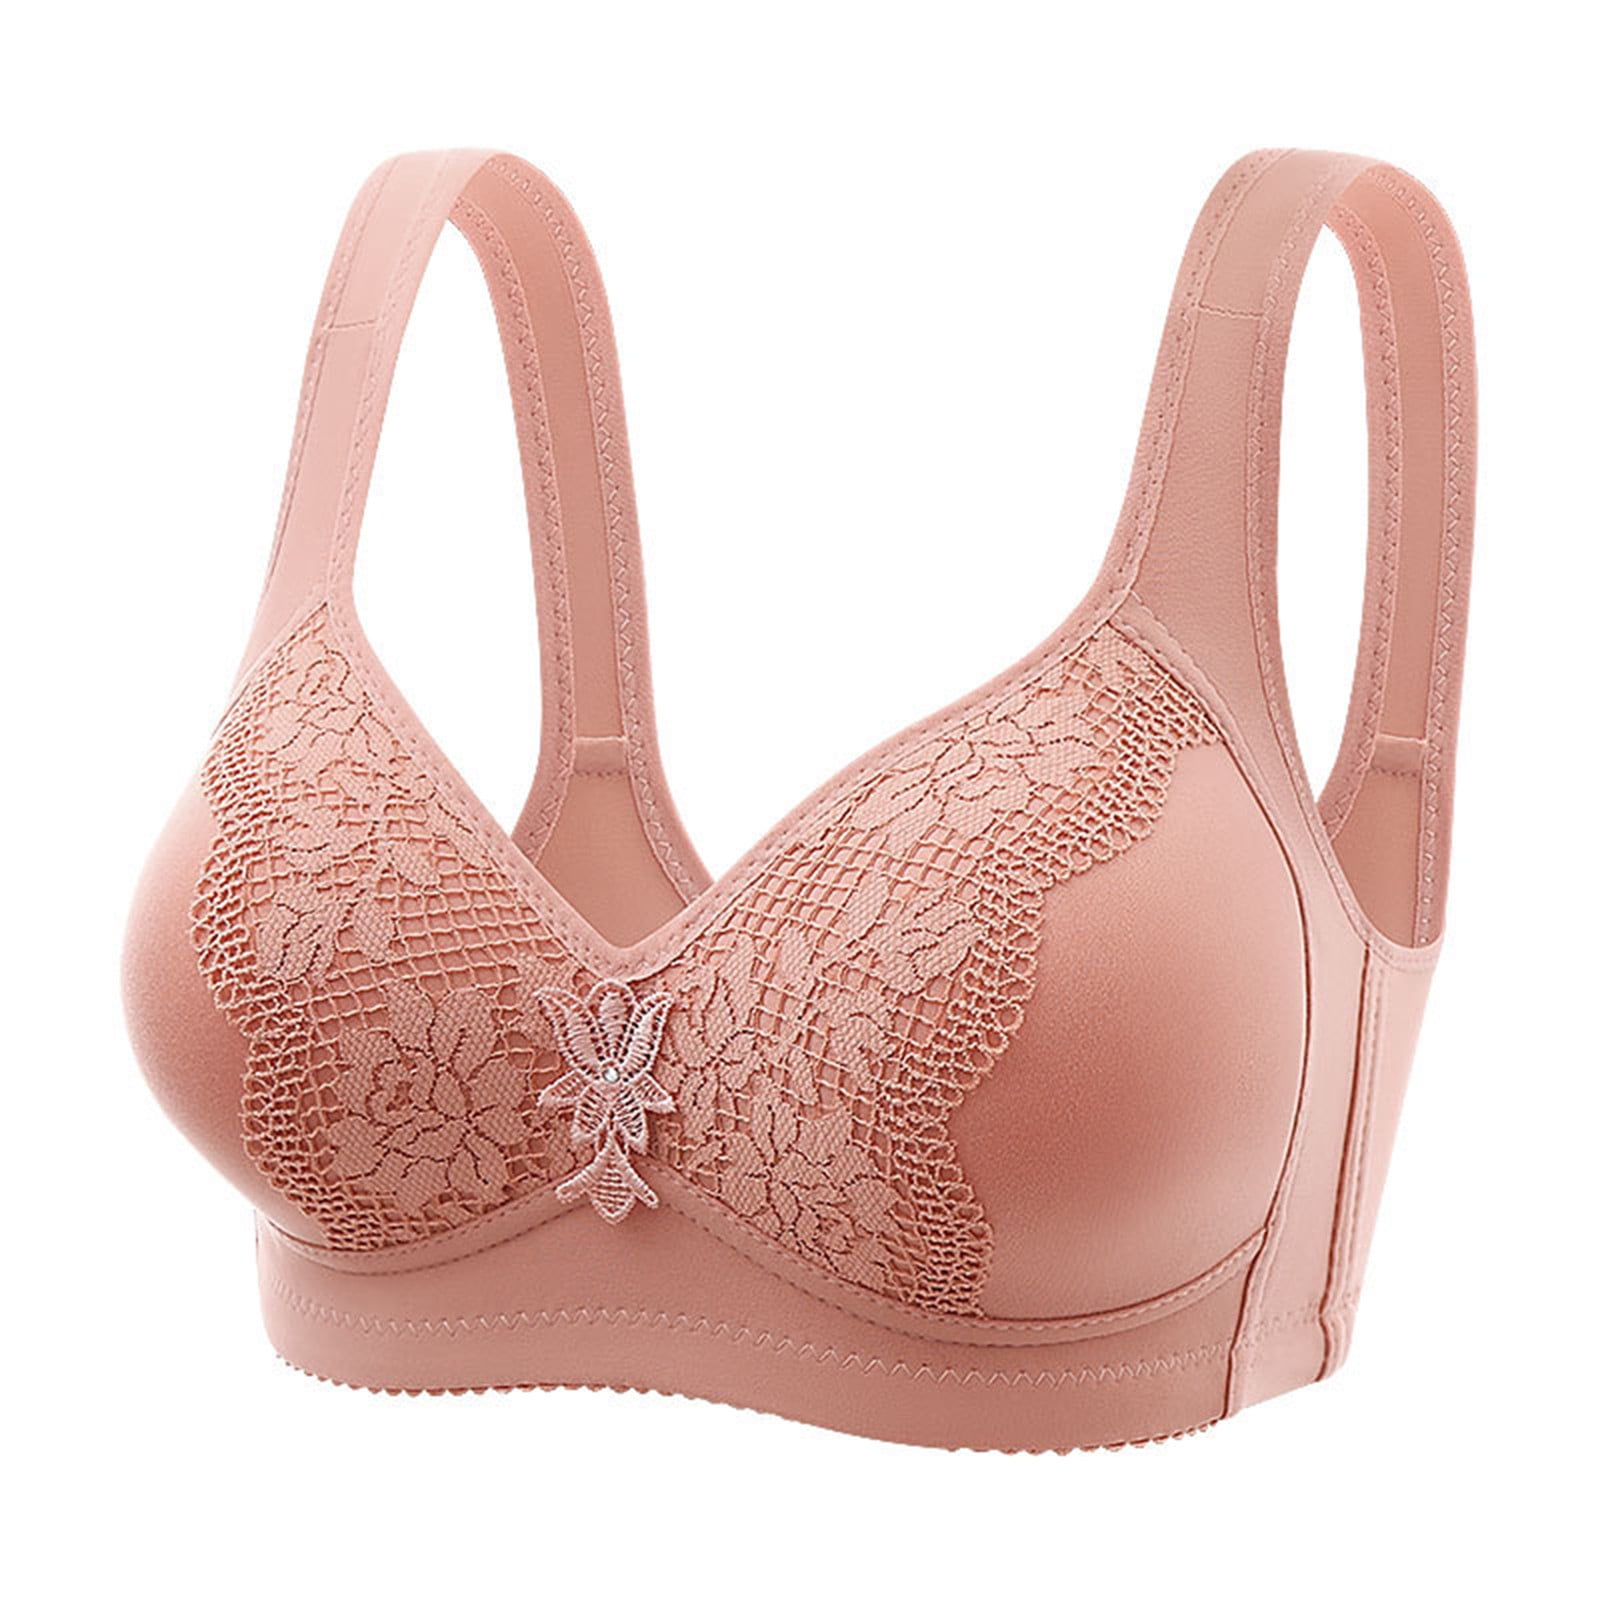 Alessandra B Mastectomy Bras with Pockets for Prosthesis Nude